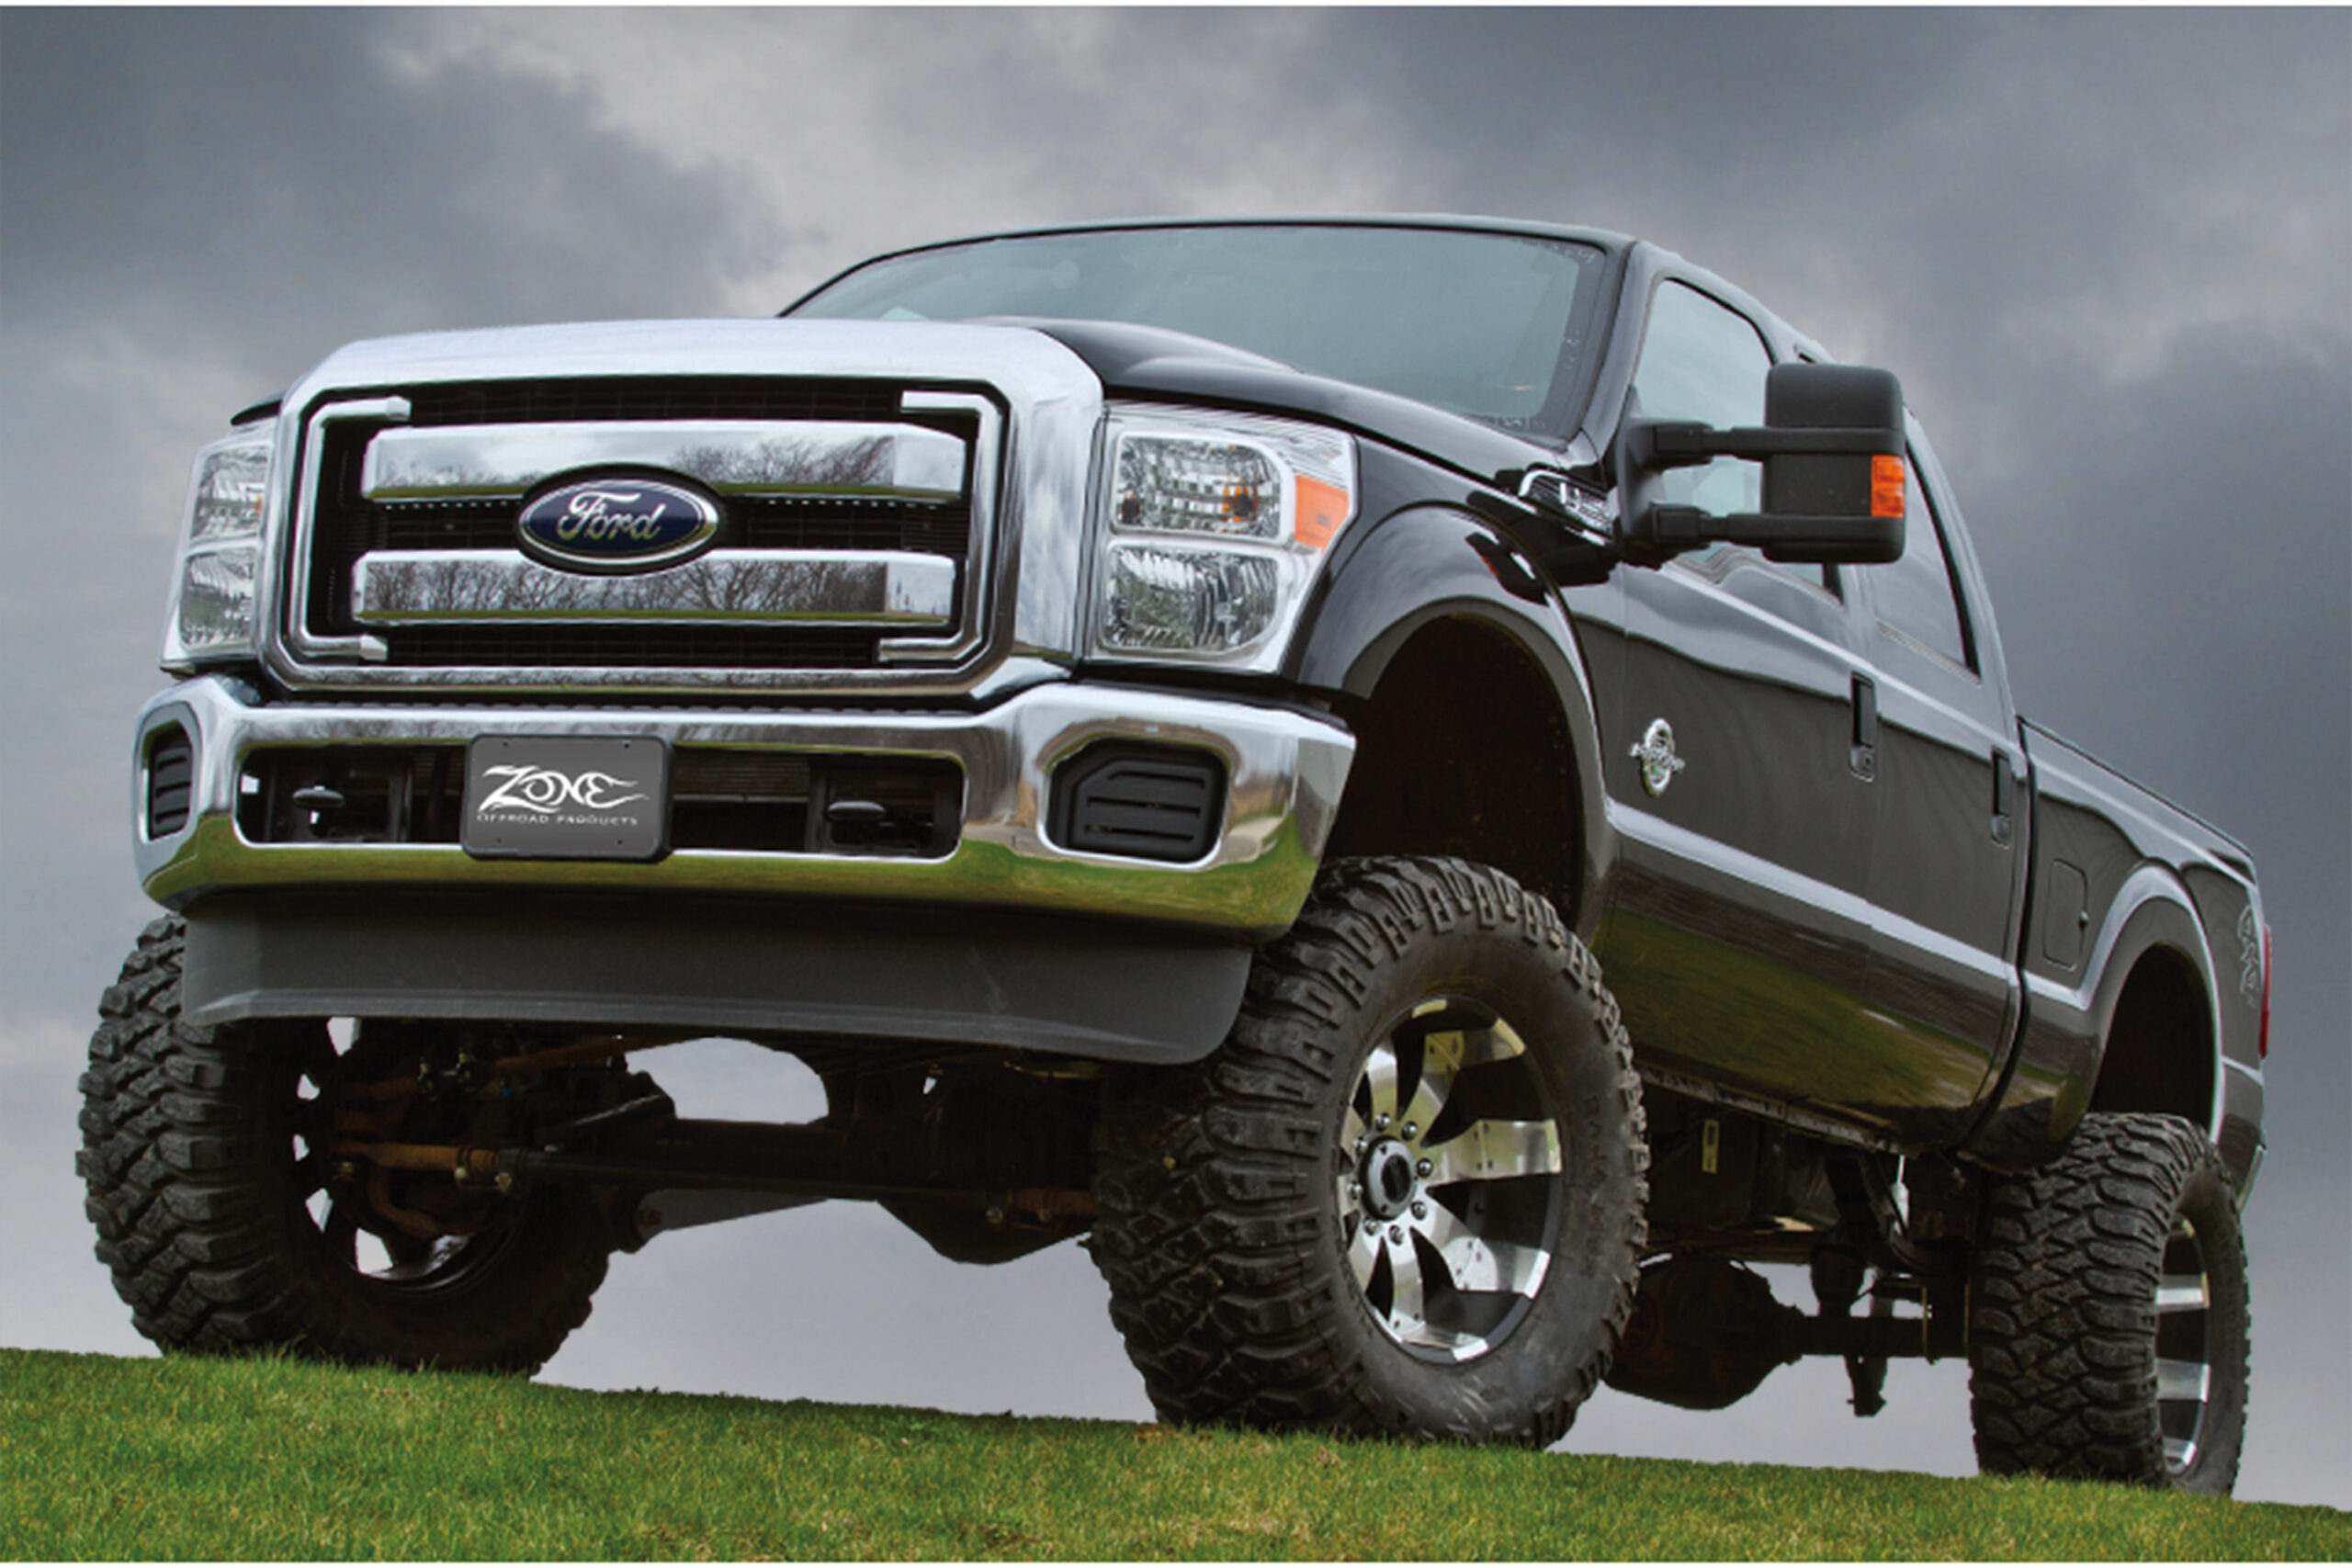 Zone Offroad 8" Coil Spring Lift Kit For 2011-2016 Ford F-350 Super Duty 4WD